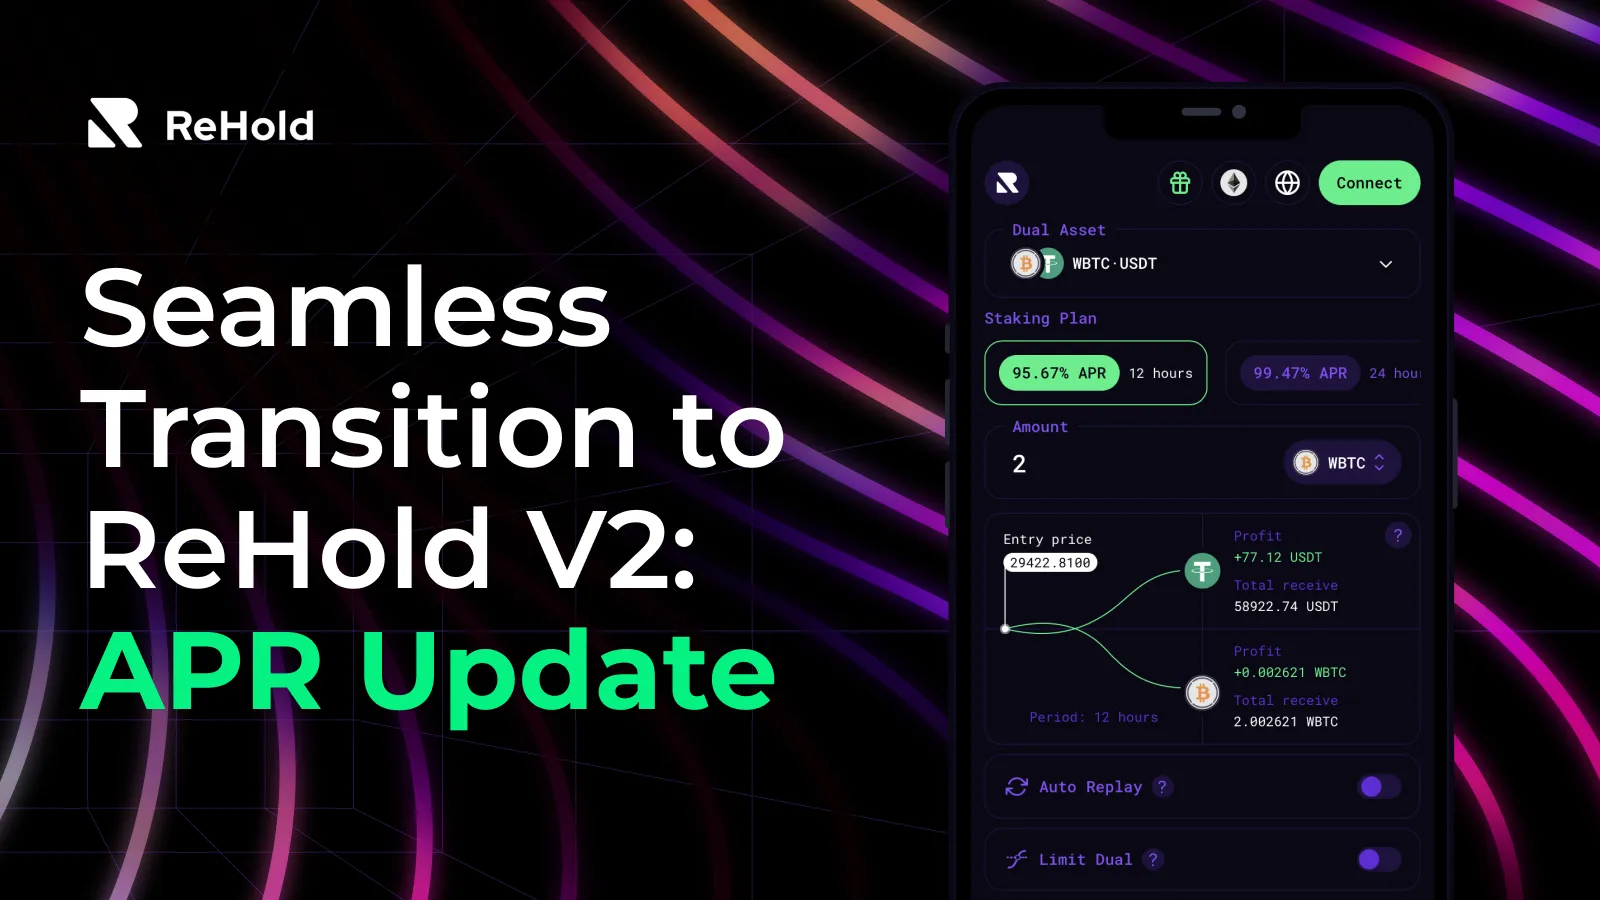 ReHold Transitions to V2: An Important Update on APR